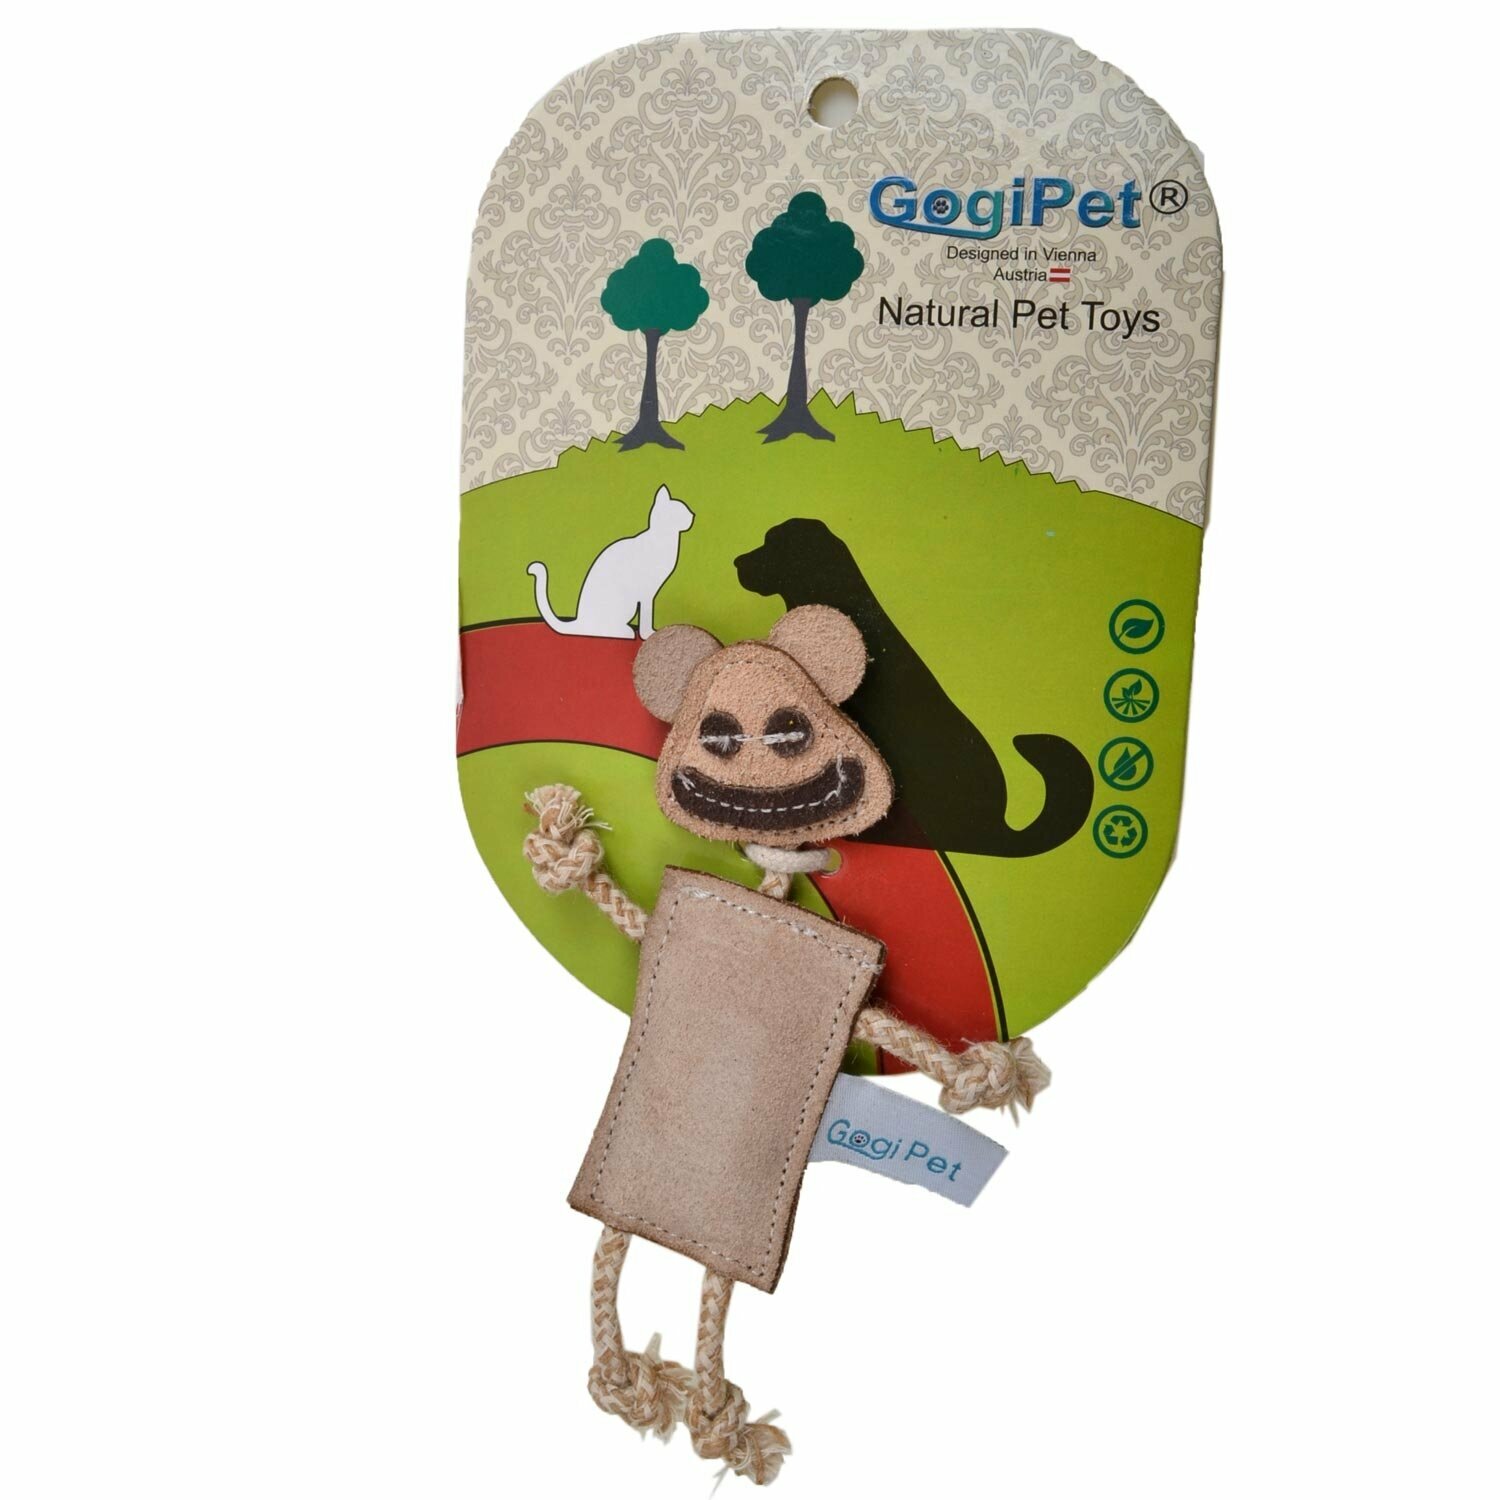 GogiPet Nature Toy cat toys fair trade produced